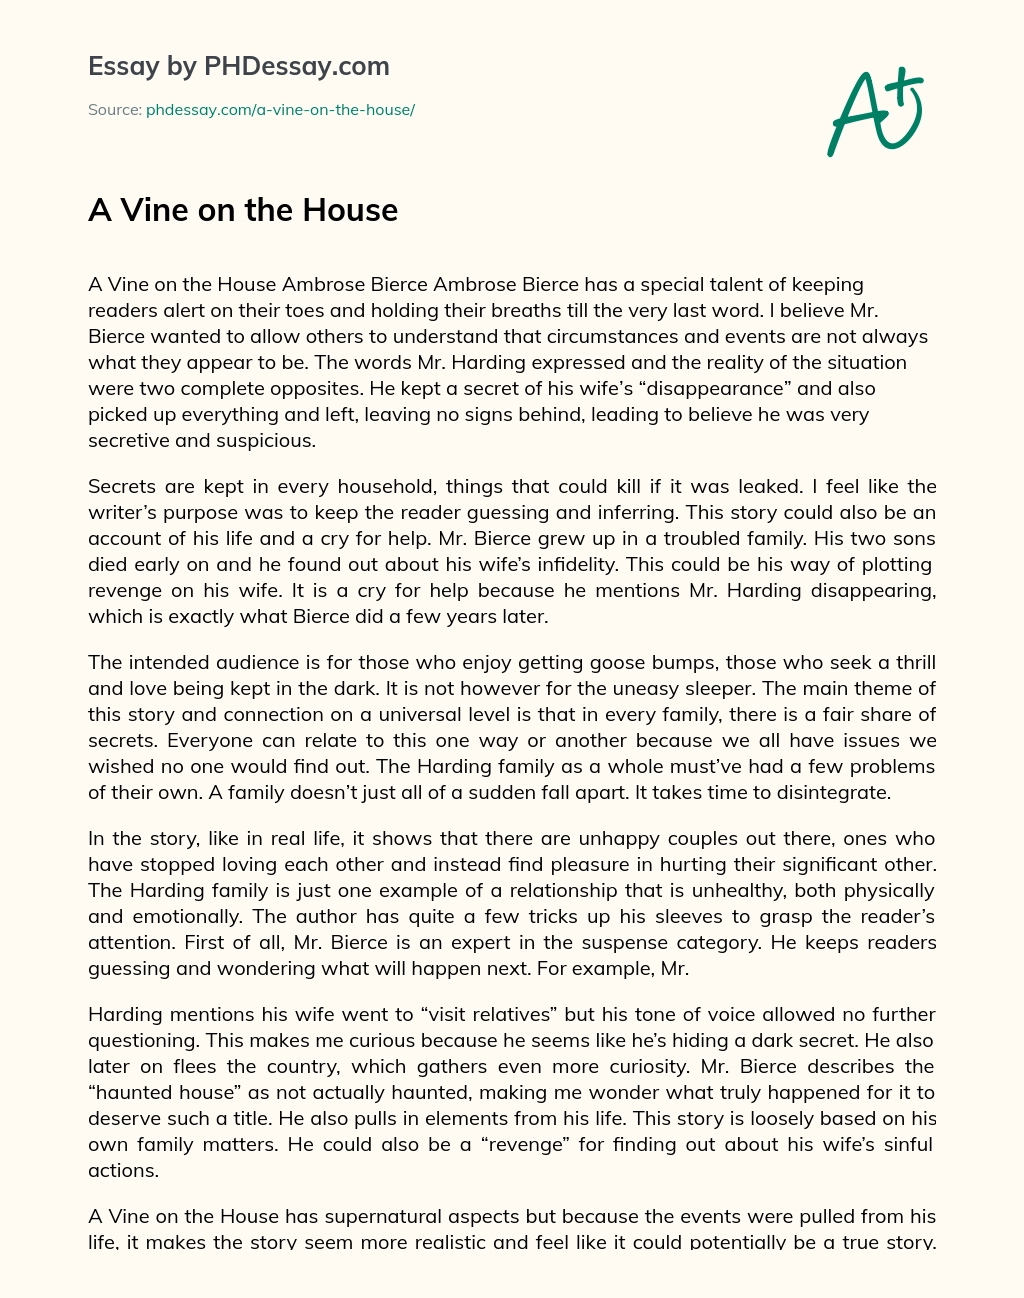 A Vine on the House essay